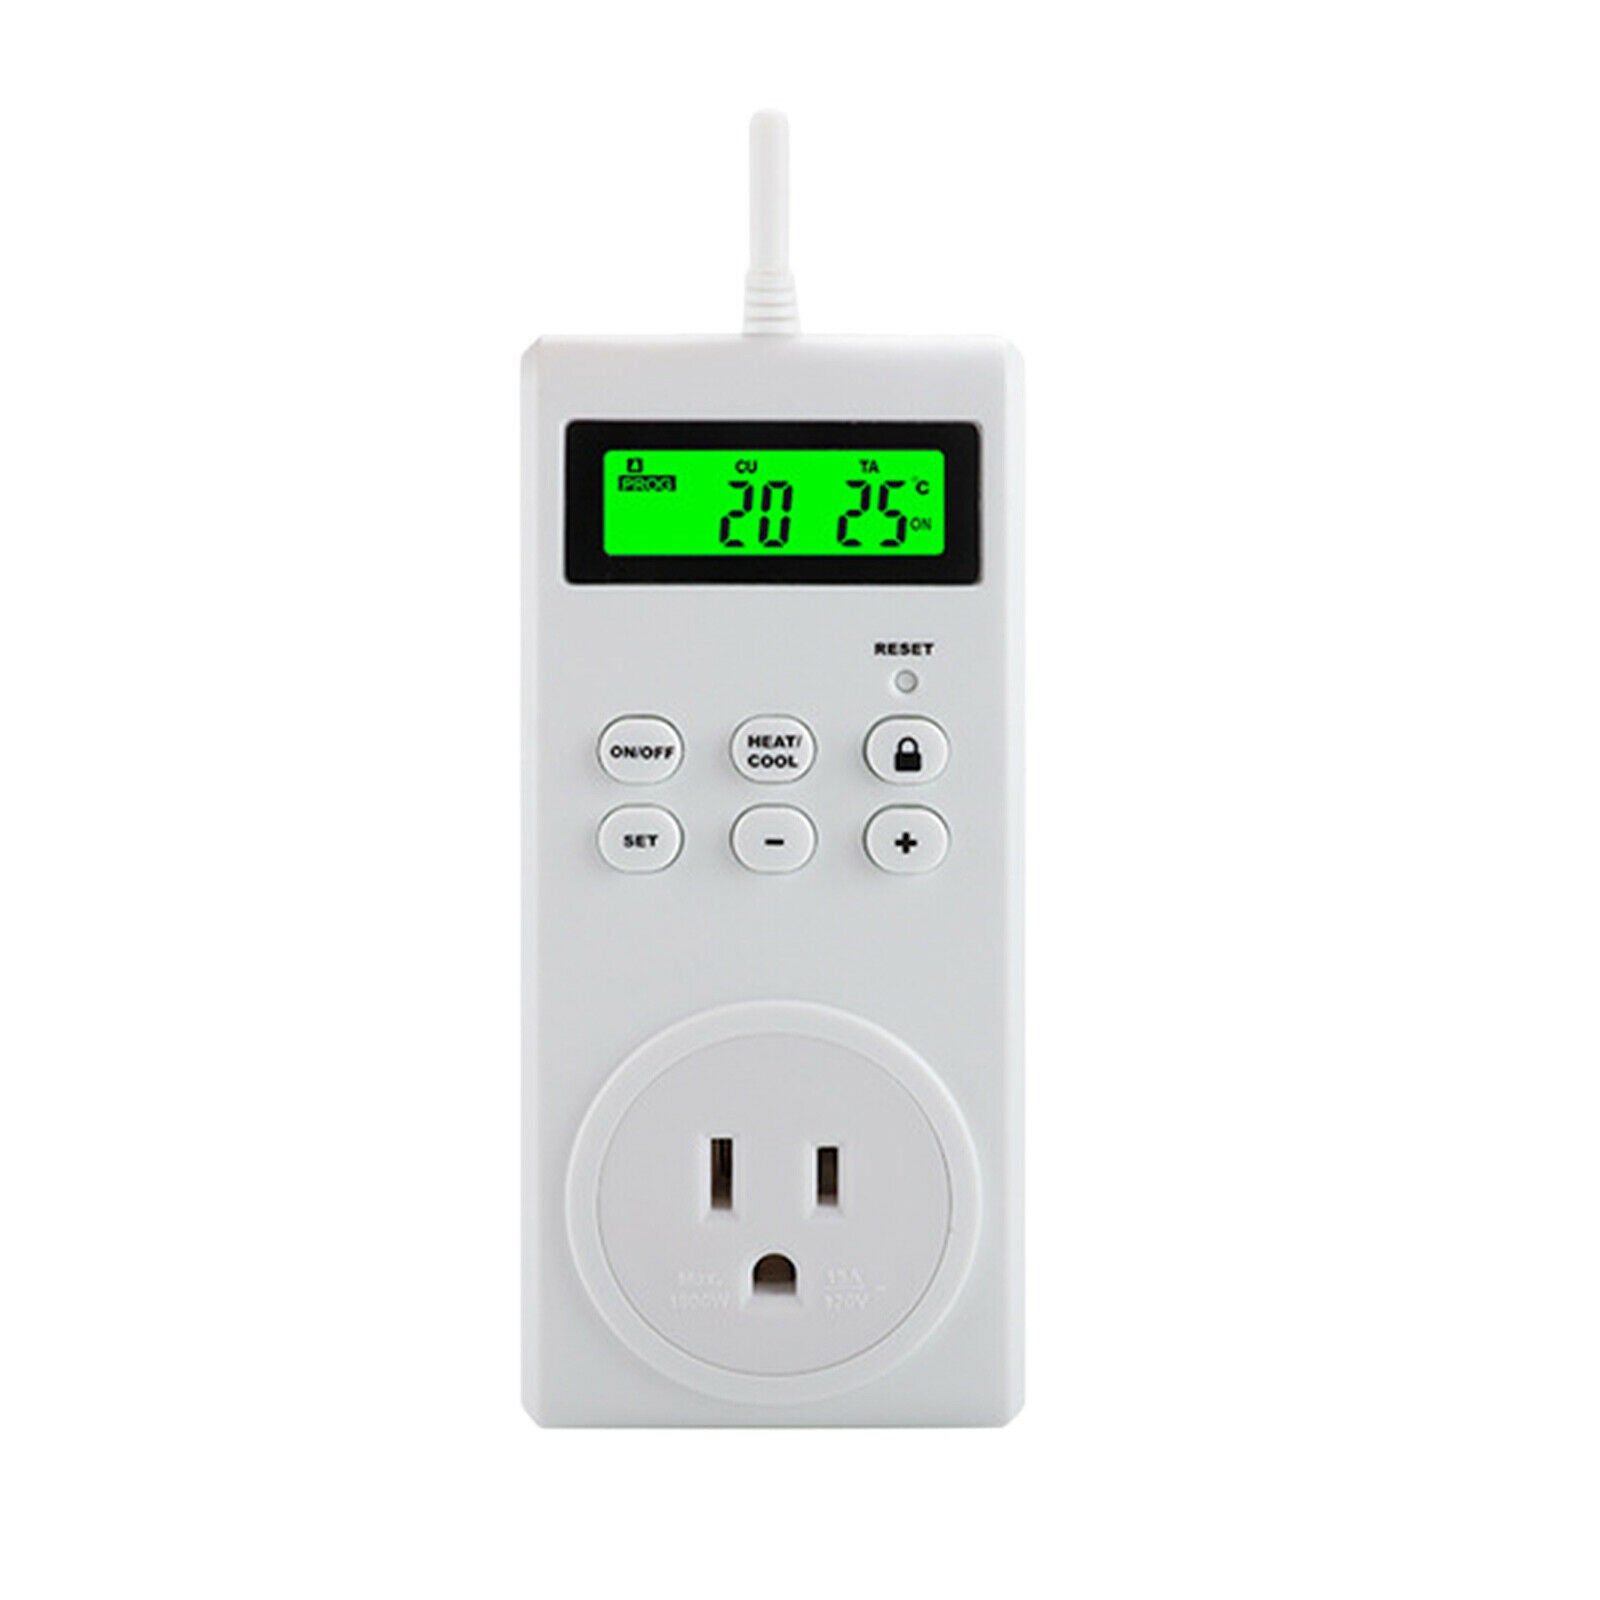 Programmable Digital Wireless Thermostat LCD Switch Plug-in Socket Outlets